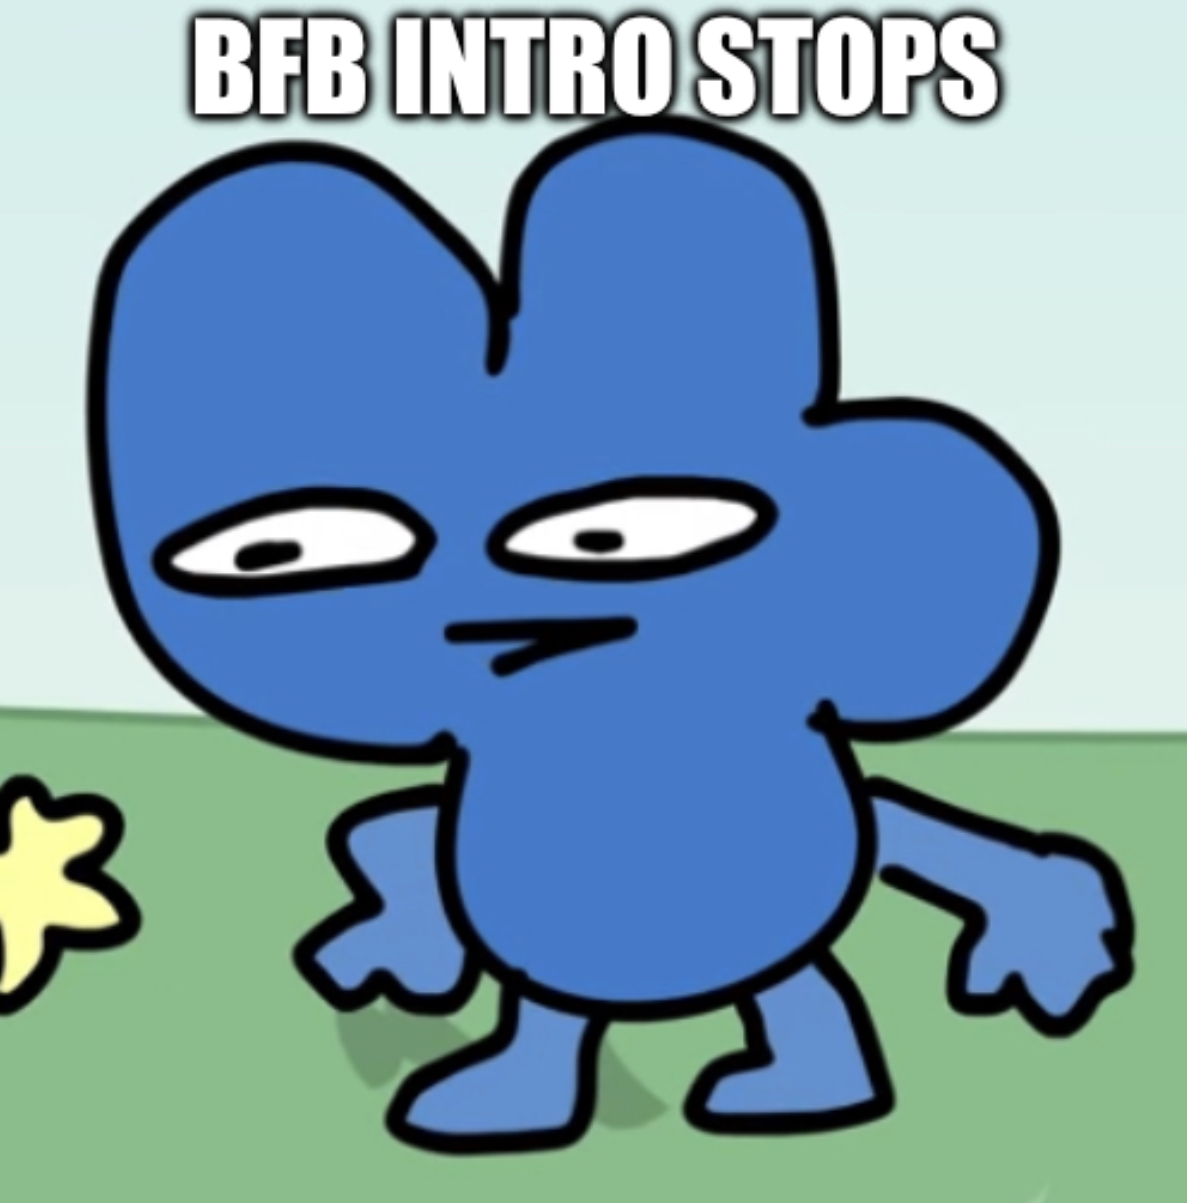 BFB Intro stops Blank Meme Template